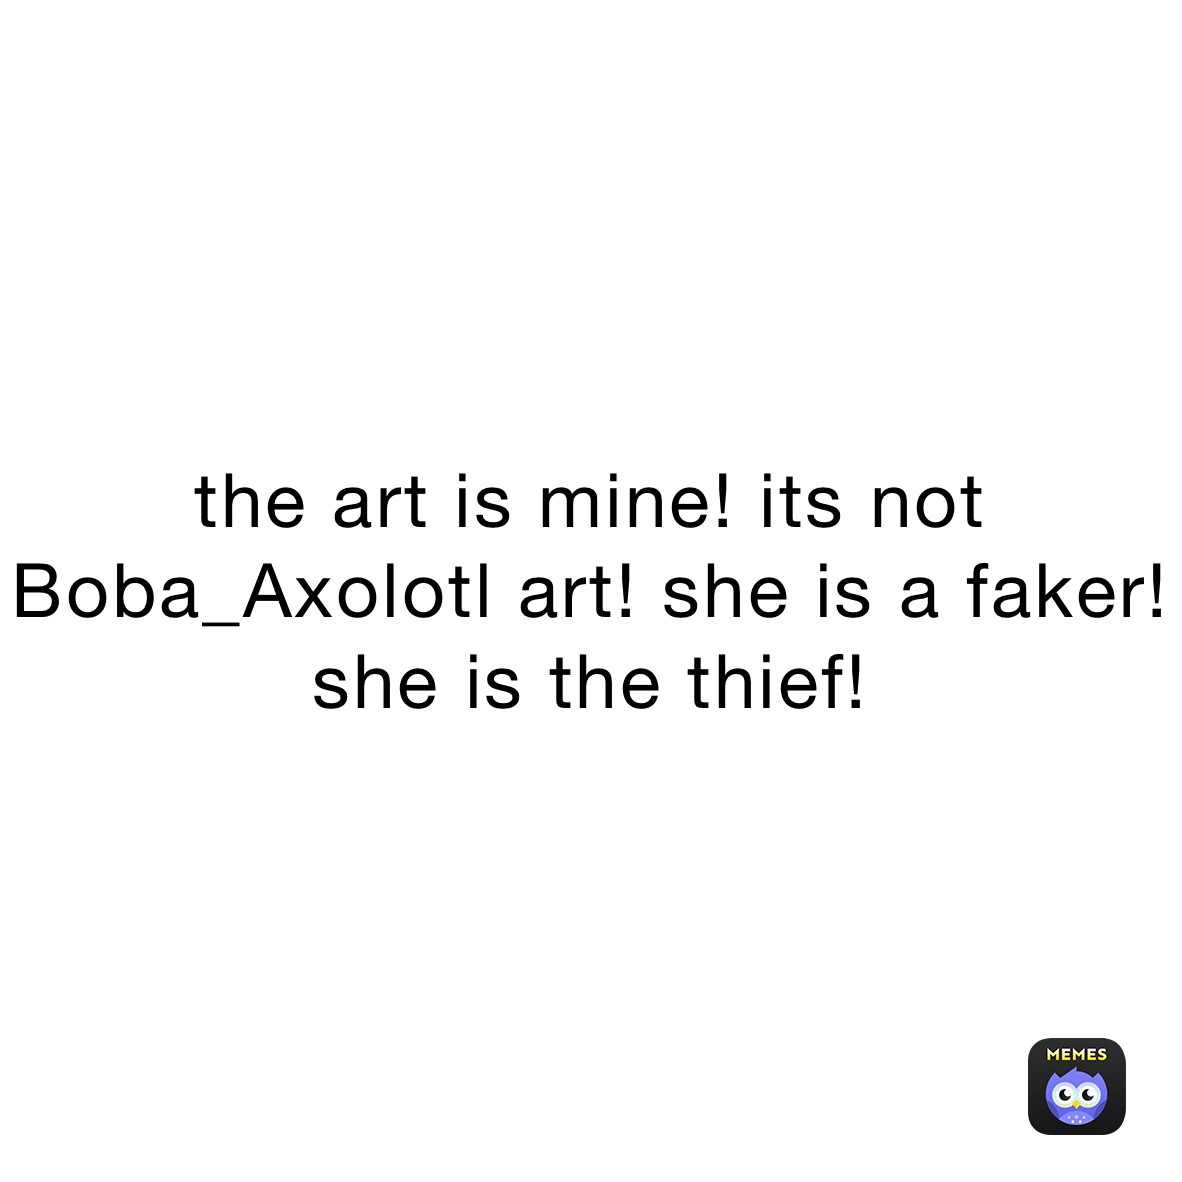 the art is mine! its not Boba_Axolotl art! she is a faker! she is the thief!